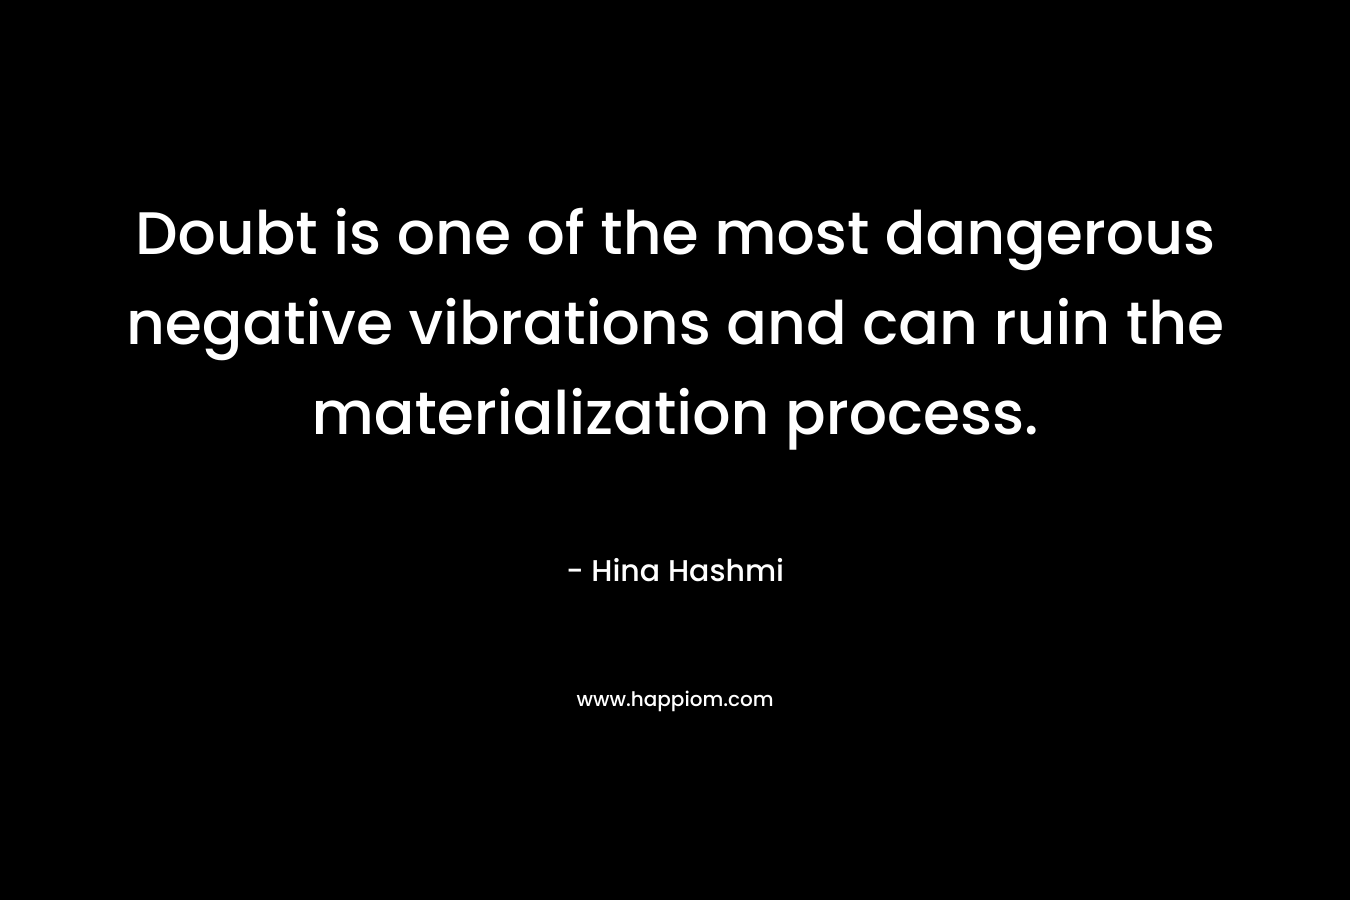 Doubt is one of the most dangerous negative vibrations and can ruin the materialization process.